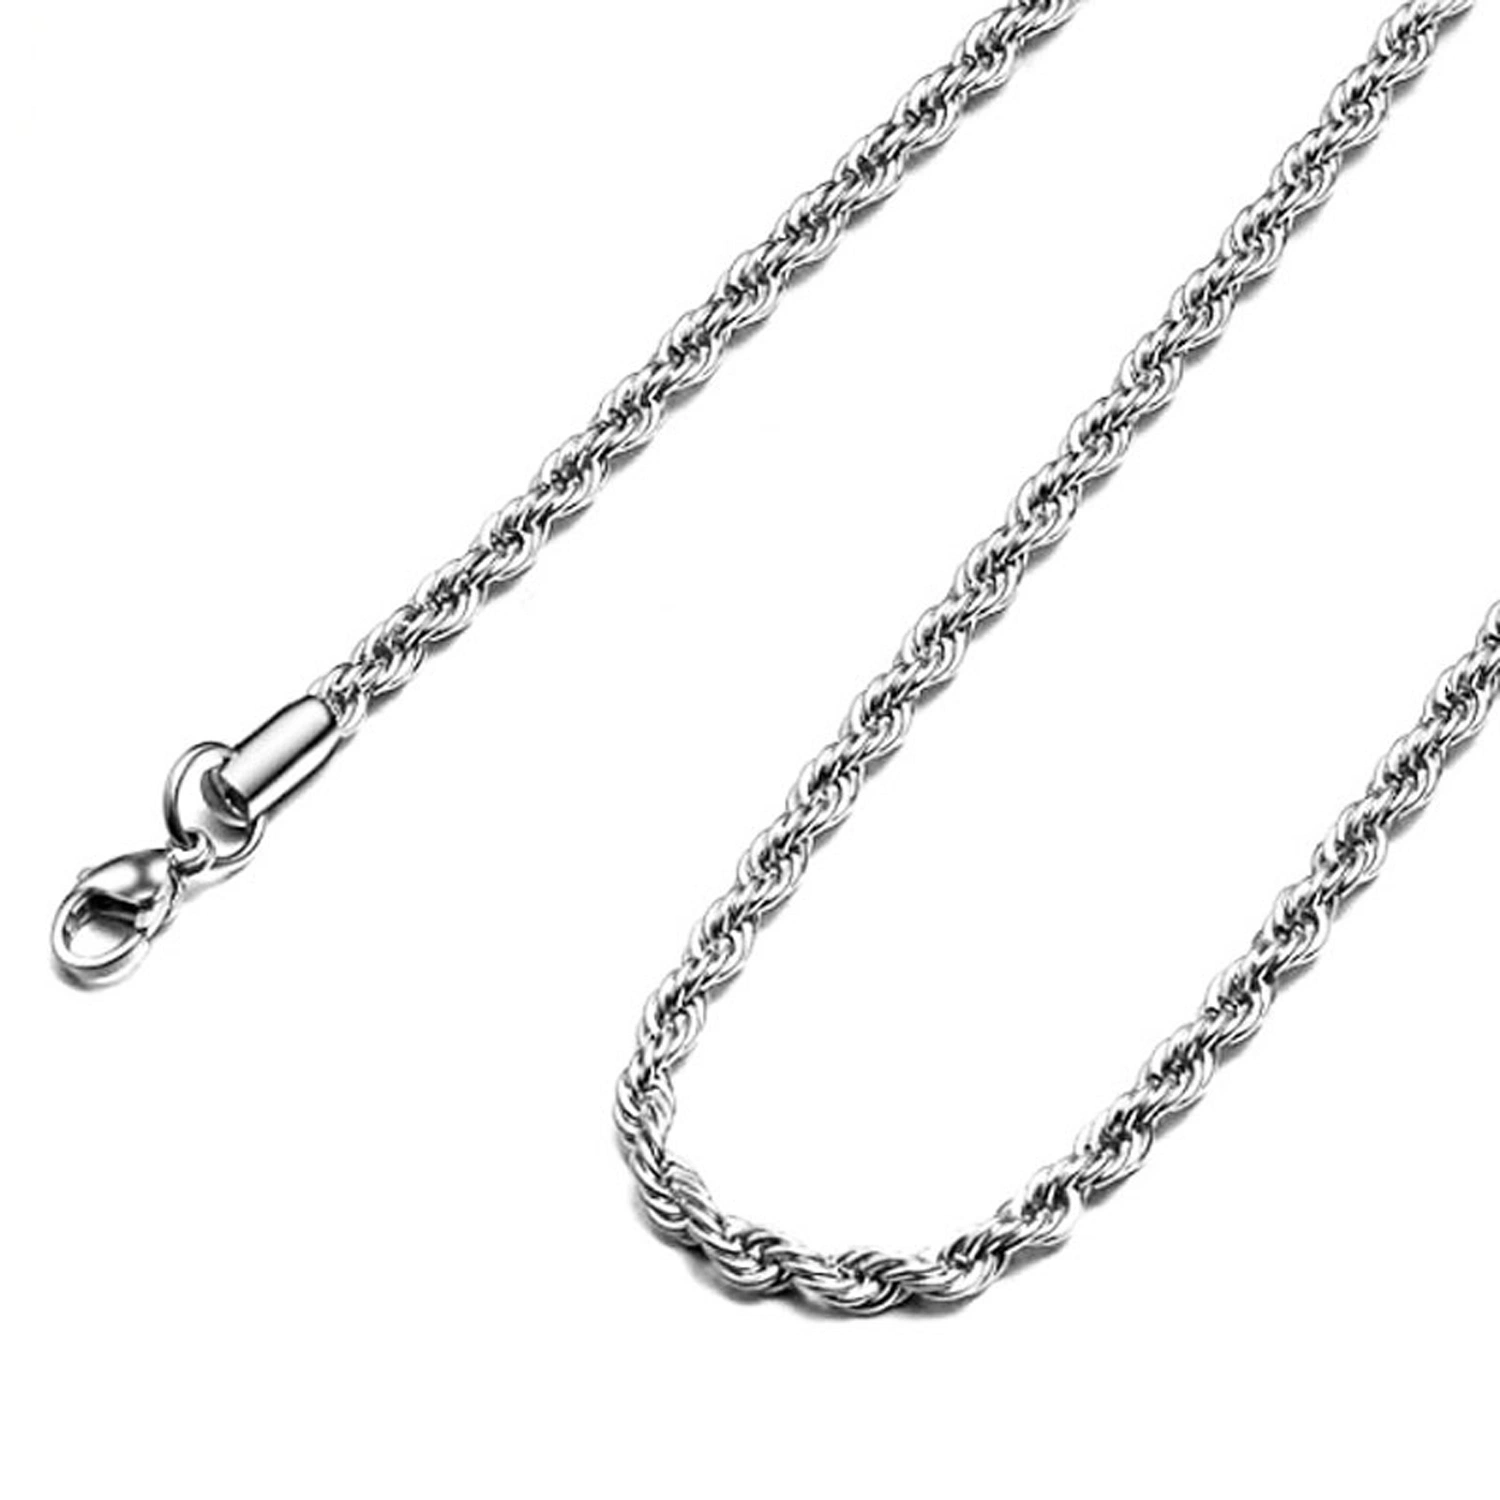 Stainless Steel Rope Jewelry Twist Chain Necklace for Men and Women